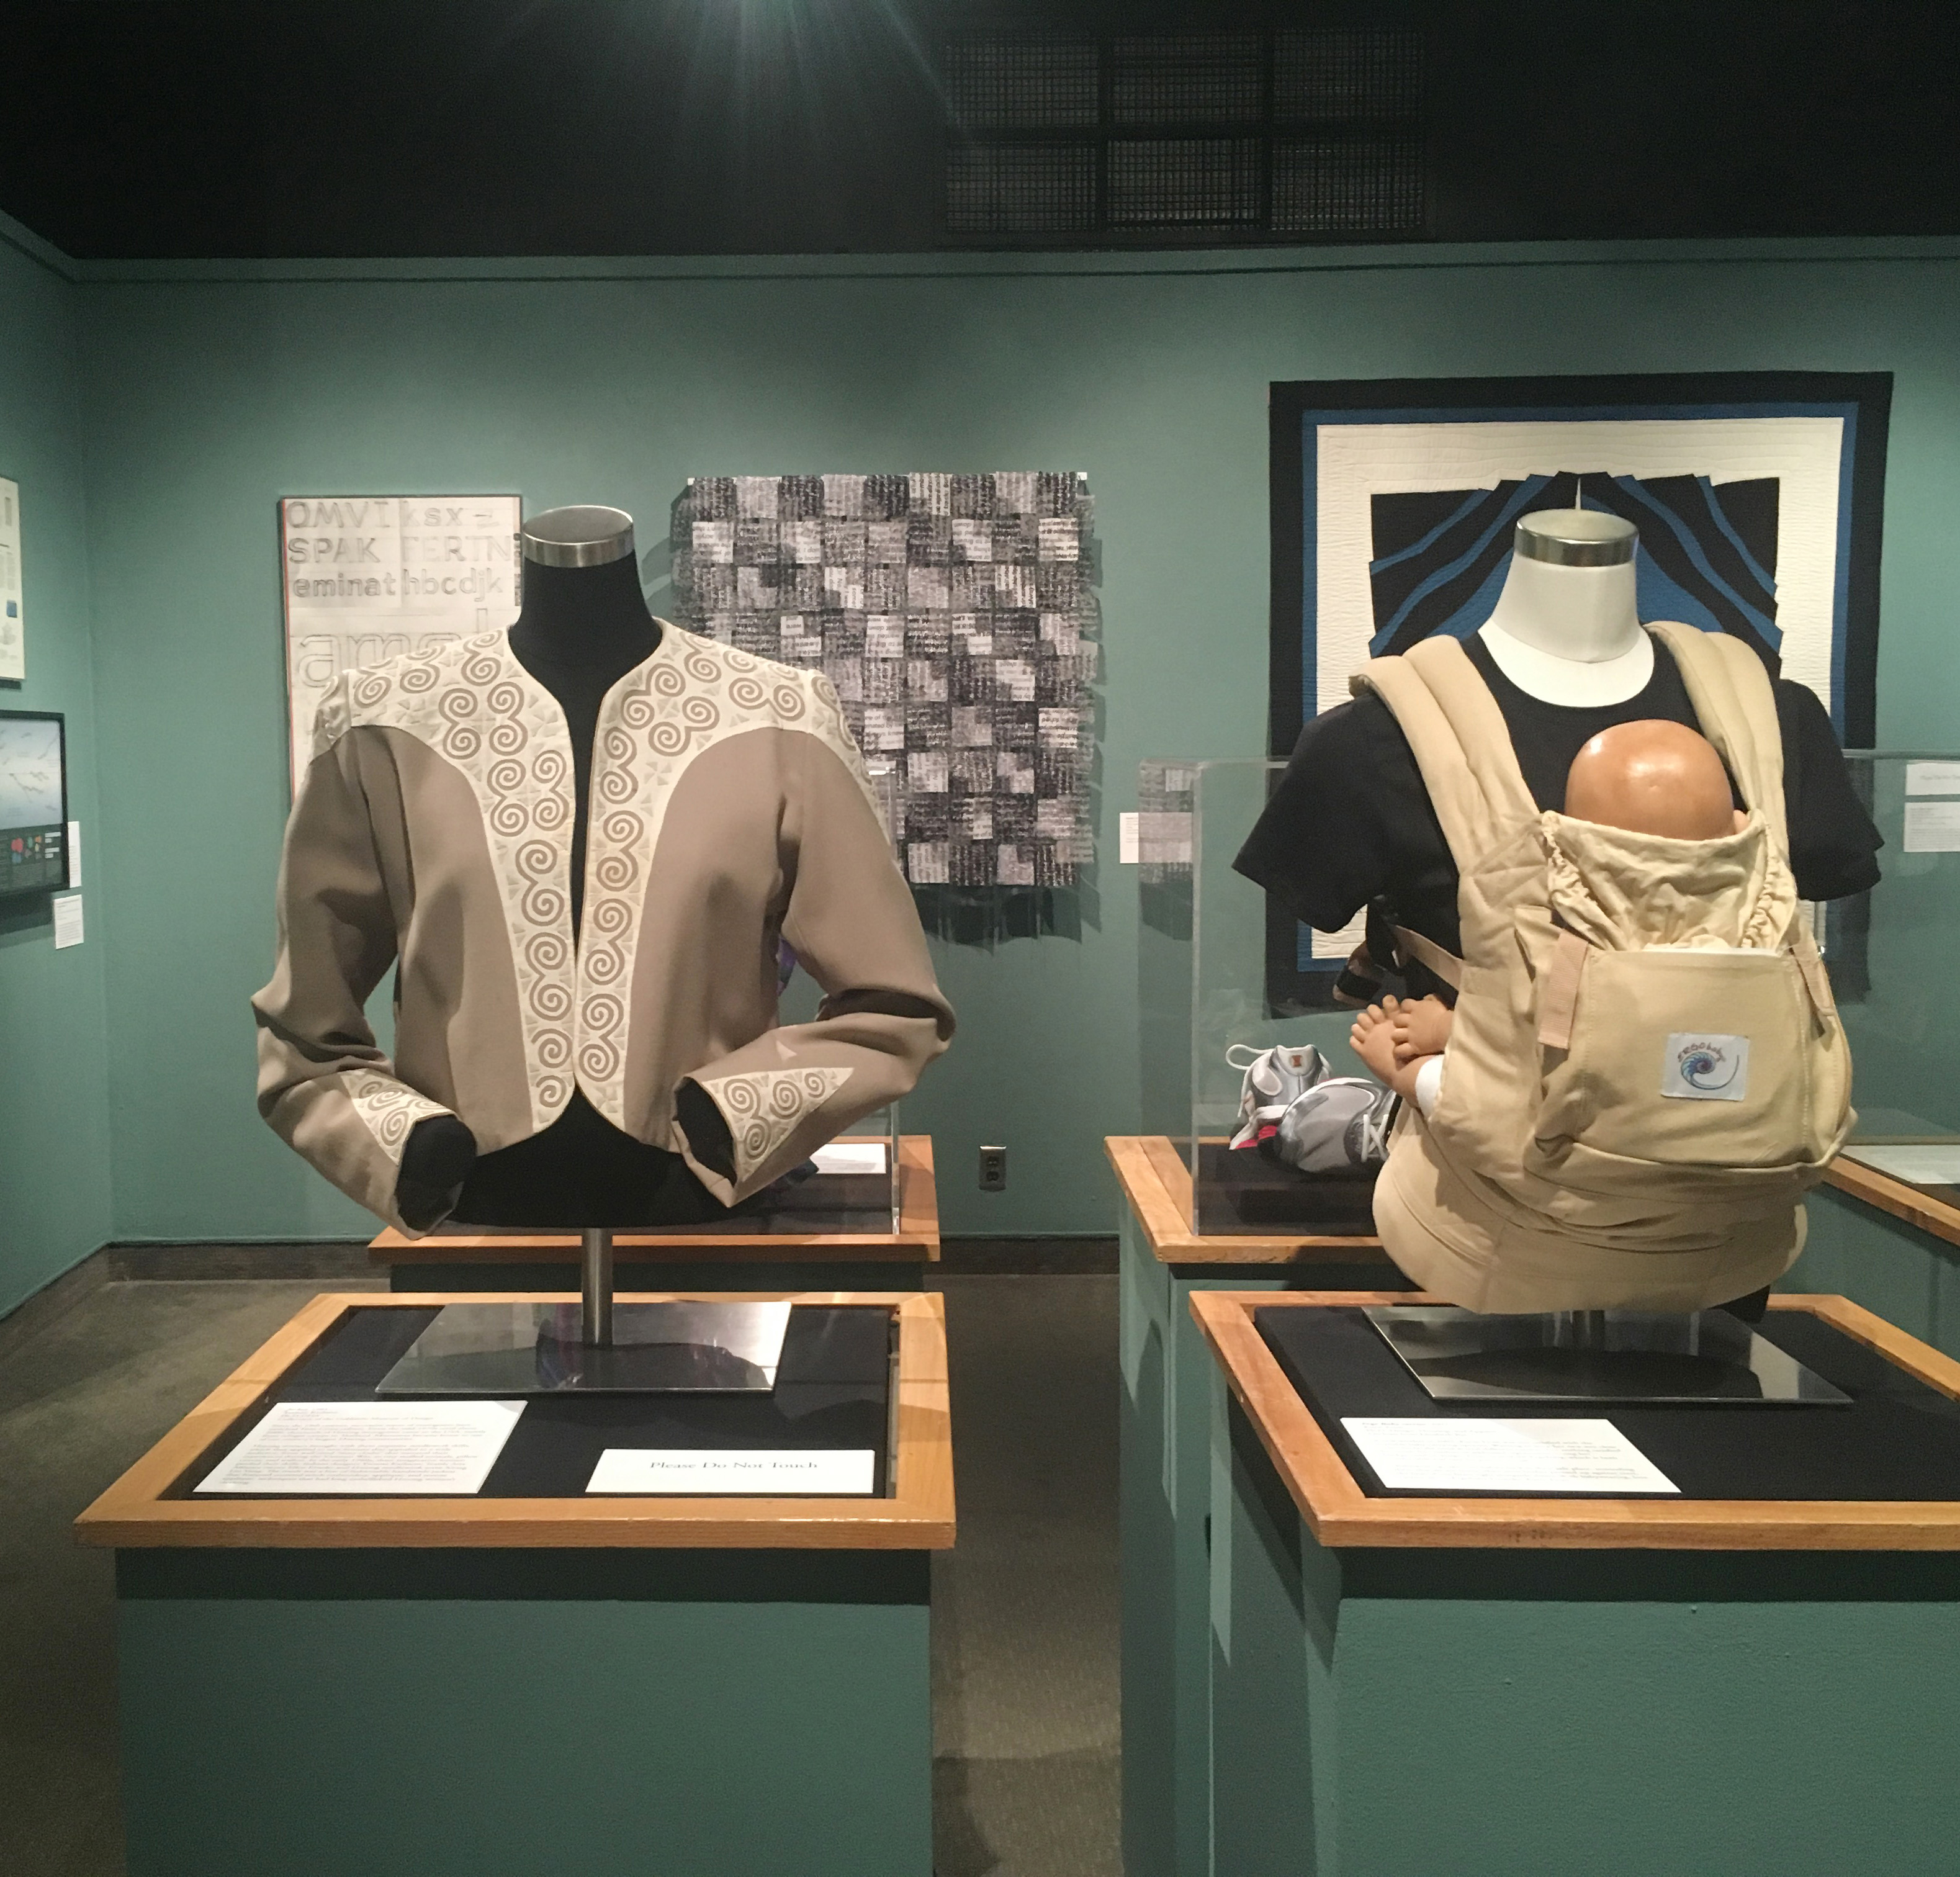 DHA 100 years of graduate education exhibition clothing and artwork on display in gallery